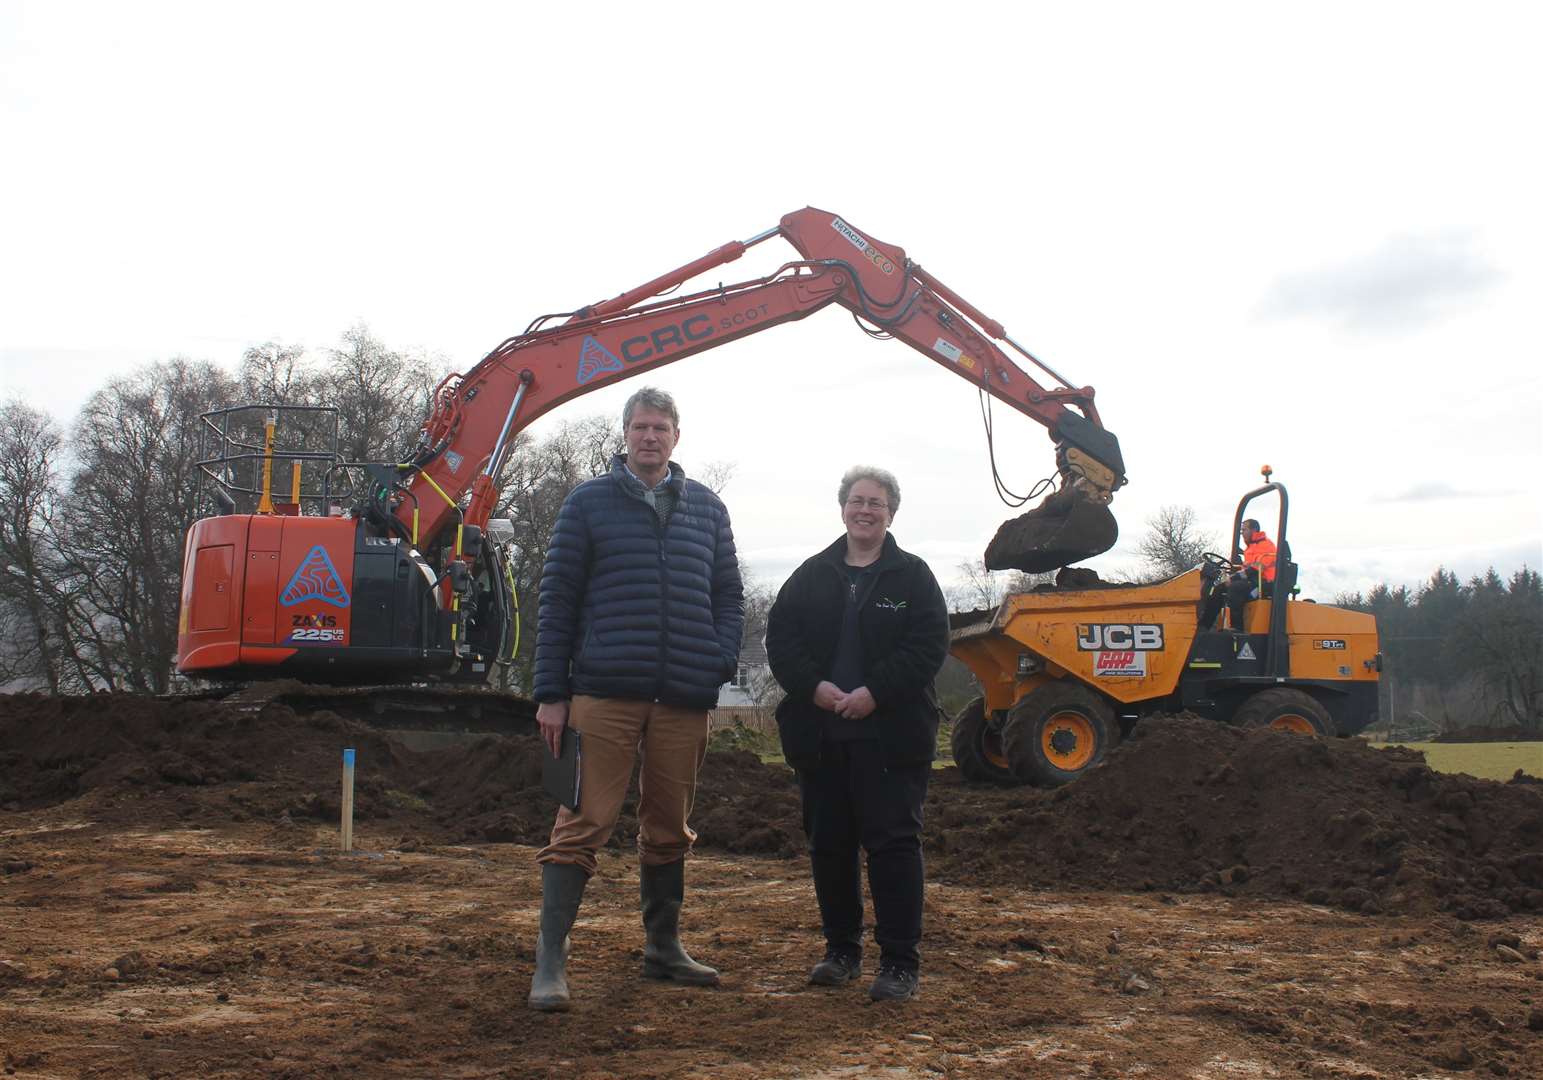 Work is now underway at the site near Banchory